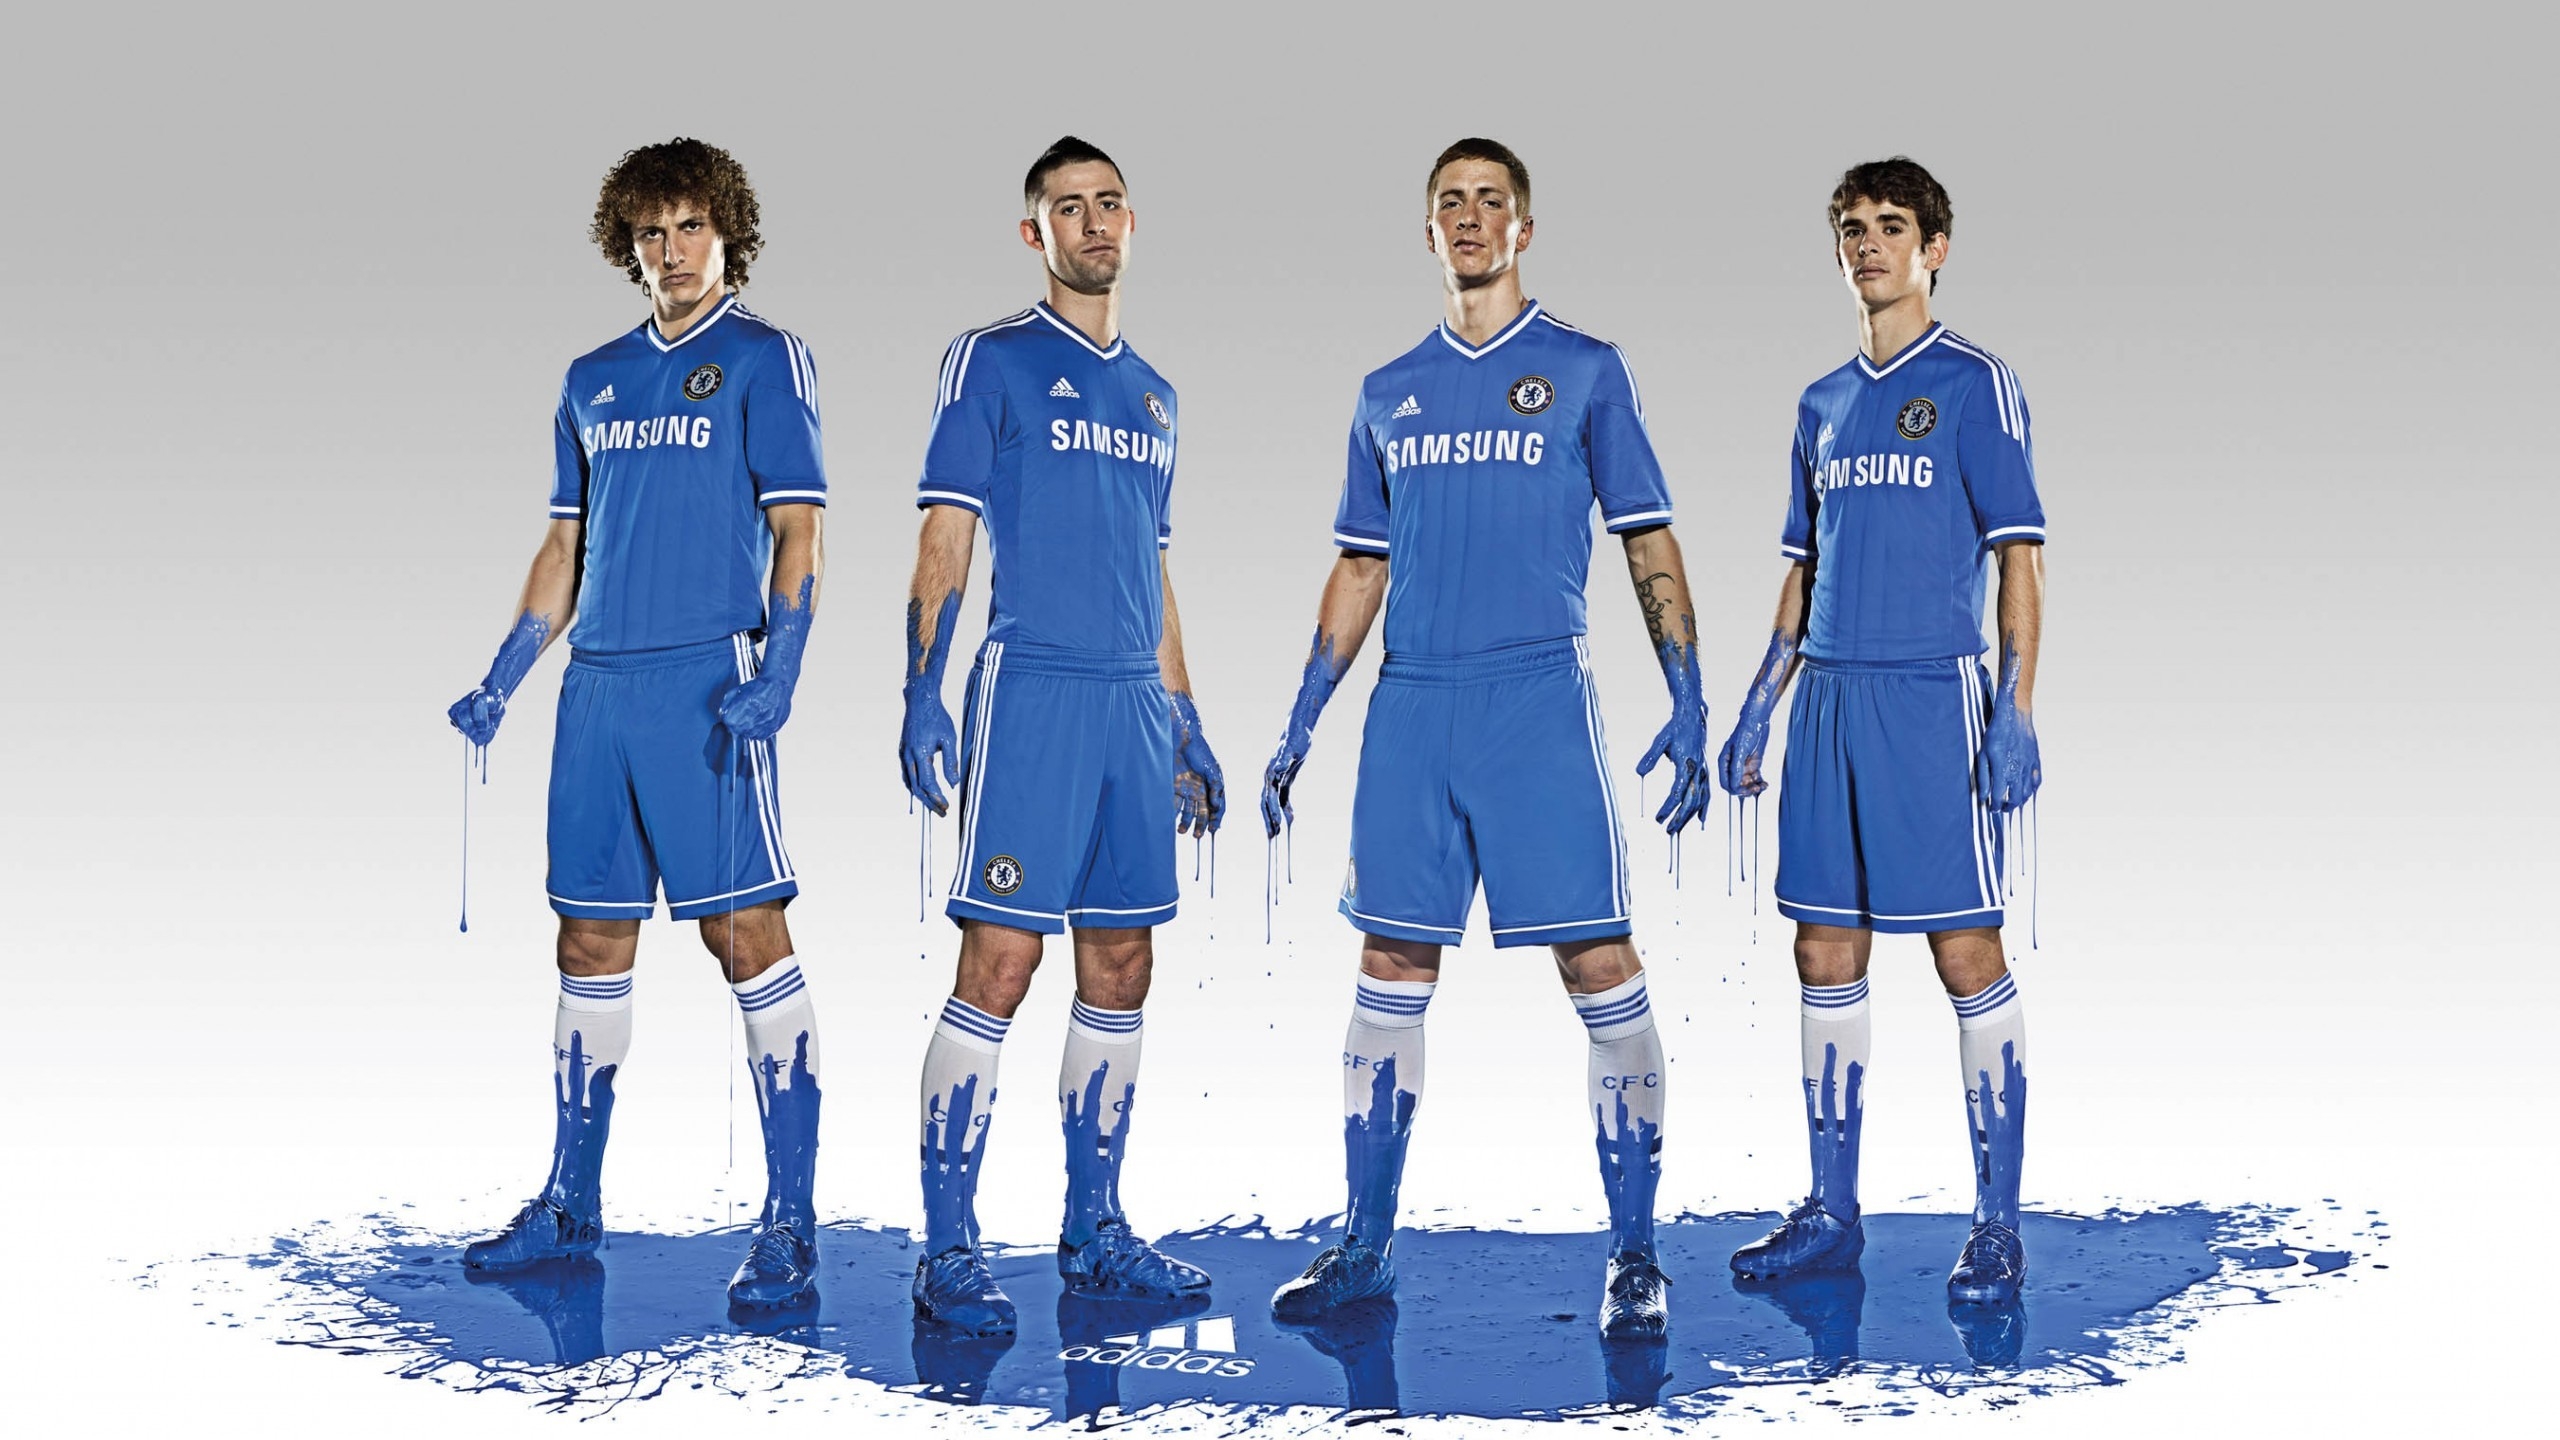 Chelsea Football Players for 2560x1440 HDTV resolution